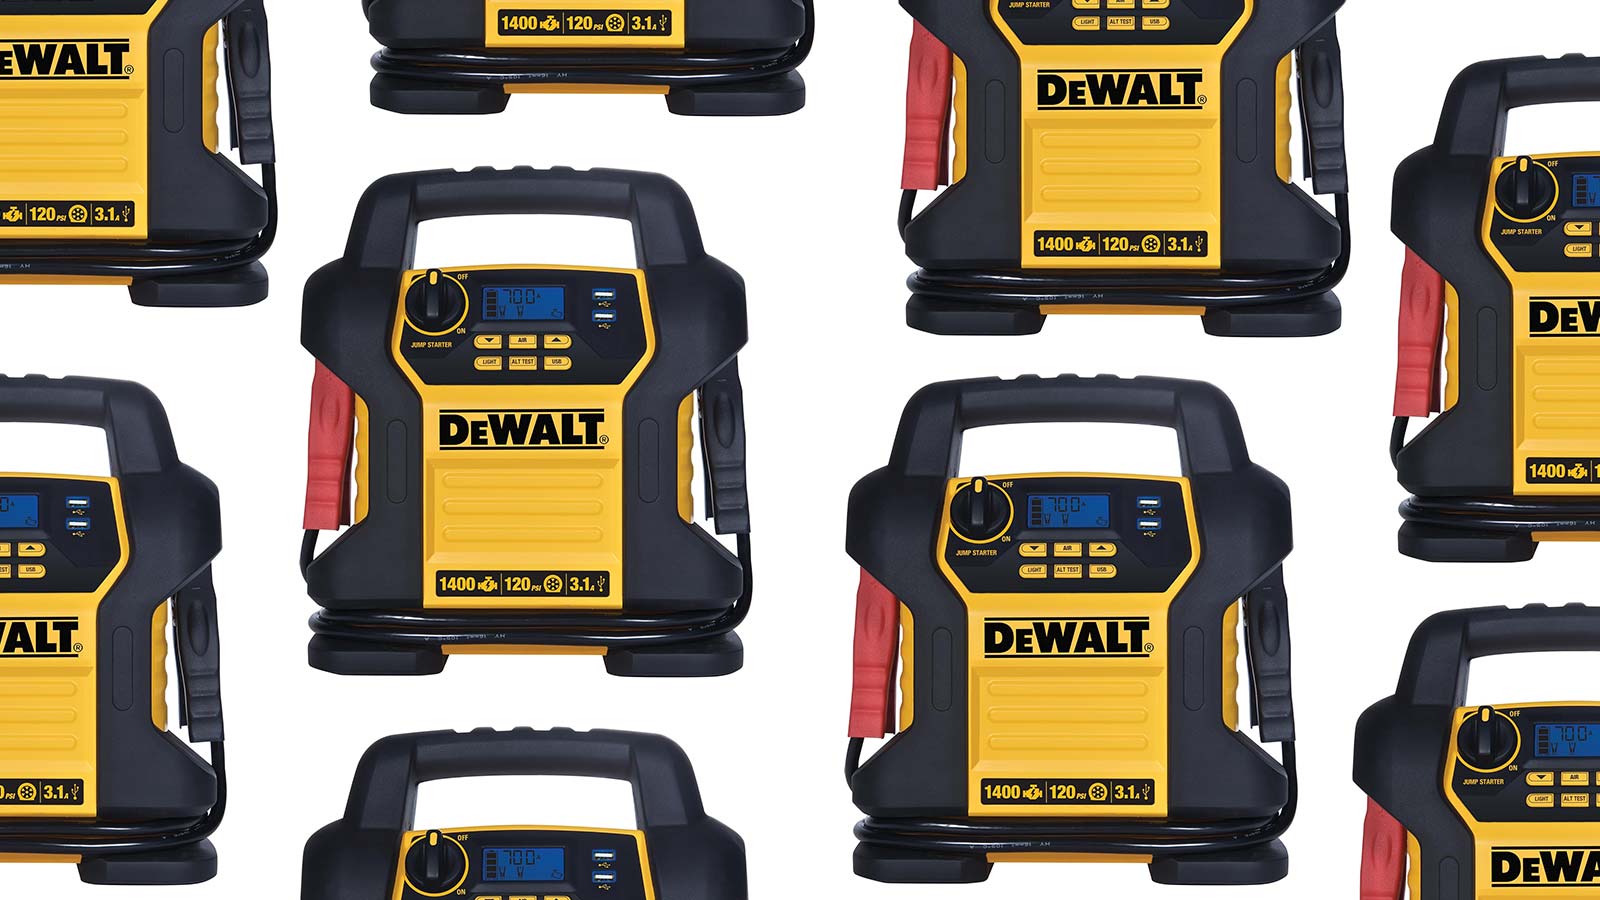 This DeWalt jump starter belongs in your car’s emergency kit, and it’s 20% off pre-Black Friday at Amazon